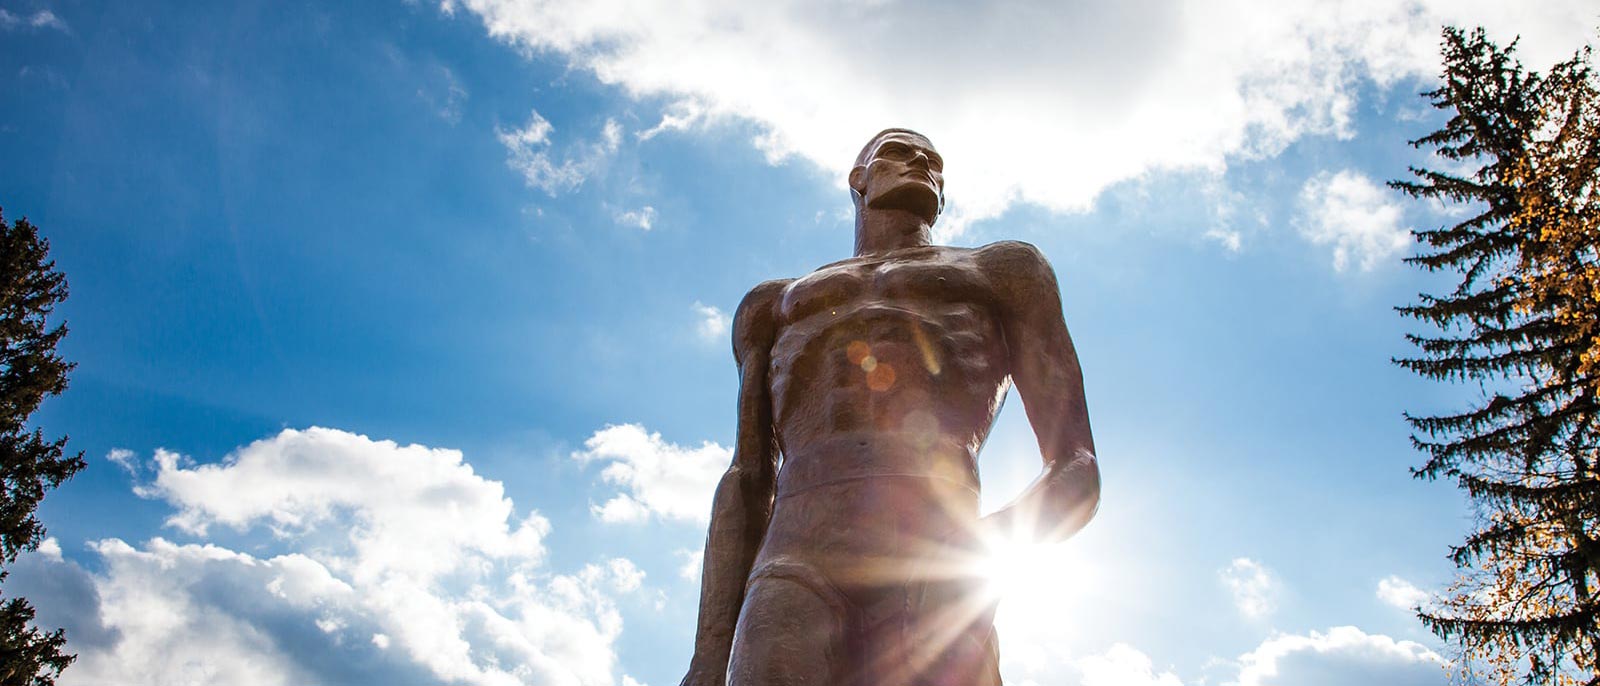 Spartan Statue with a blue sky in the background.